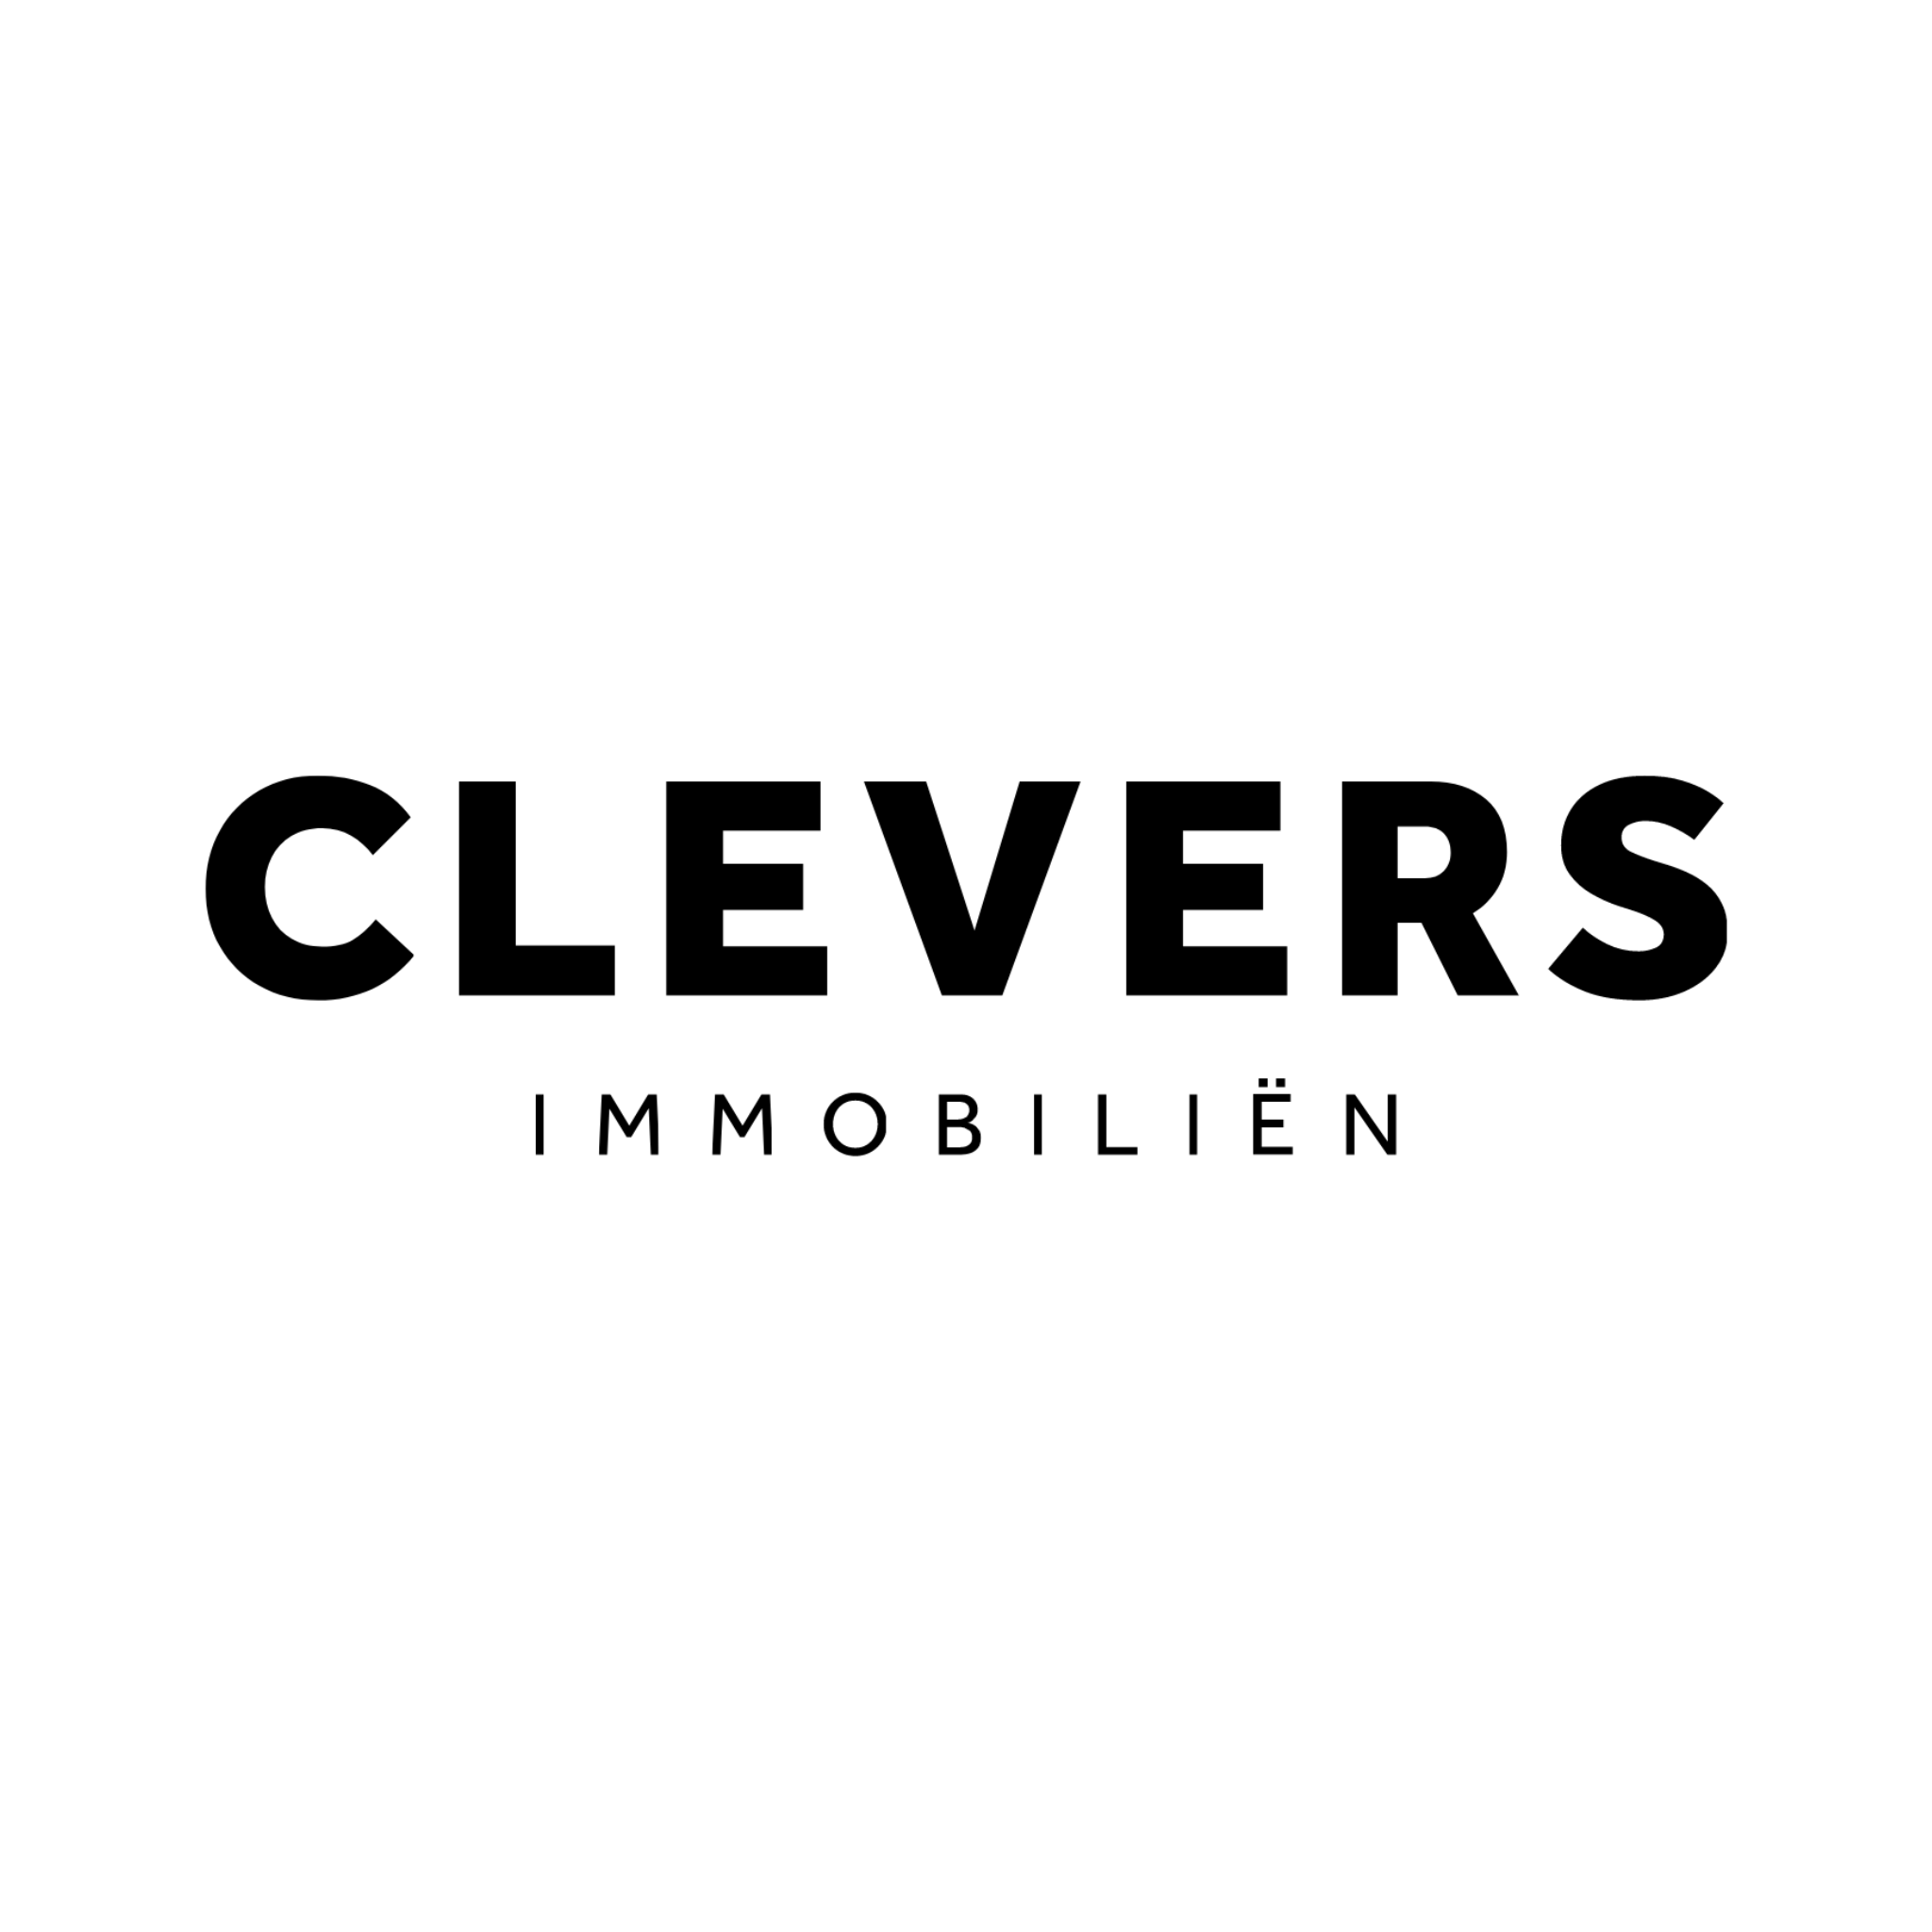 Clevers Immobilien Brugge